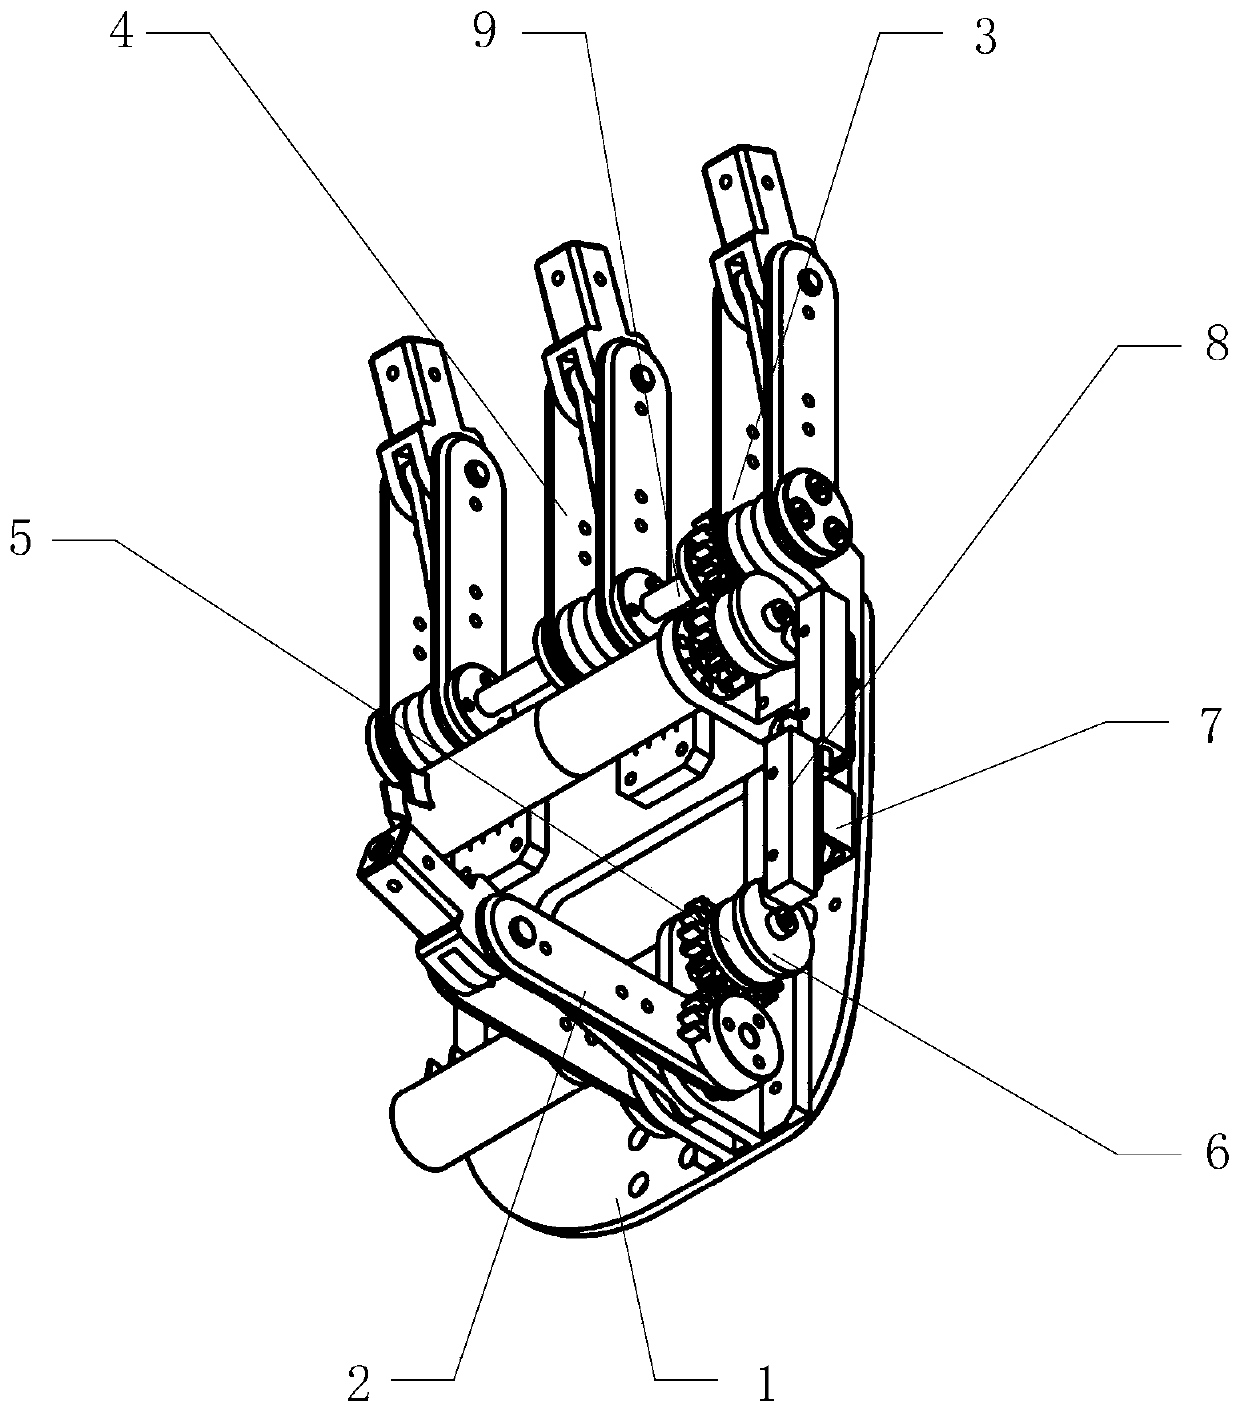 Robot dexterous hand finger pointing device and method